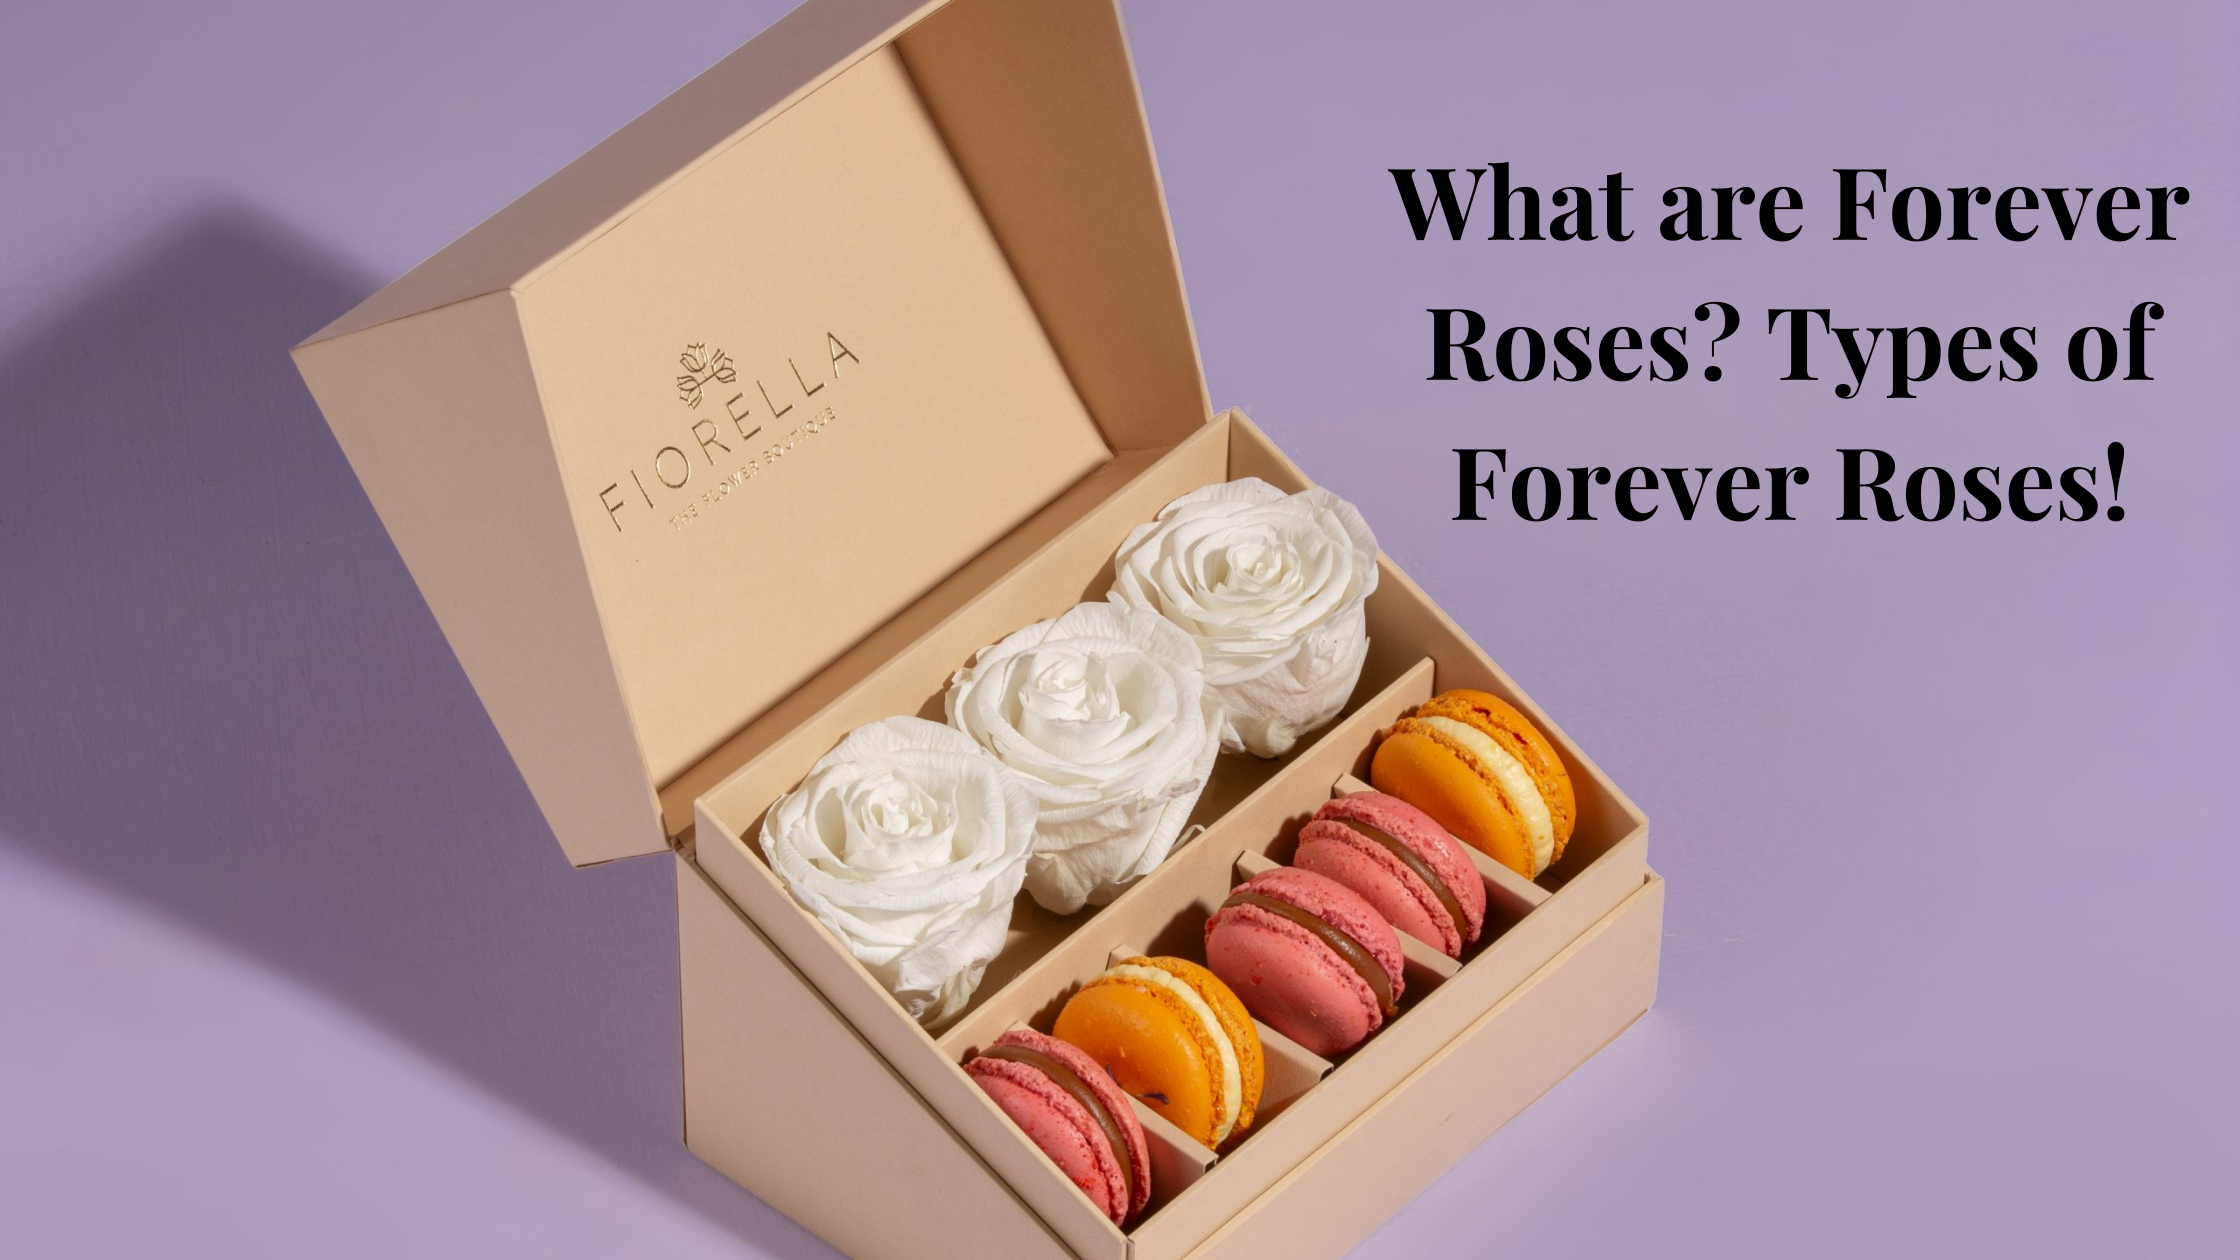 What are Forever Roses Types of Forever Roses!